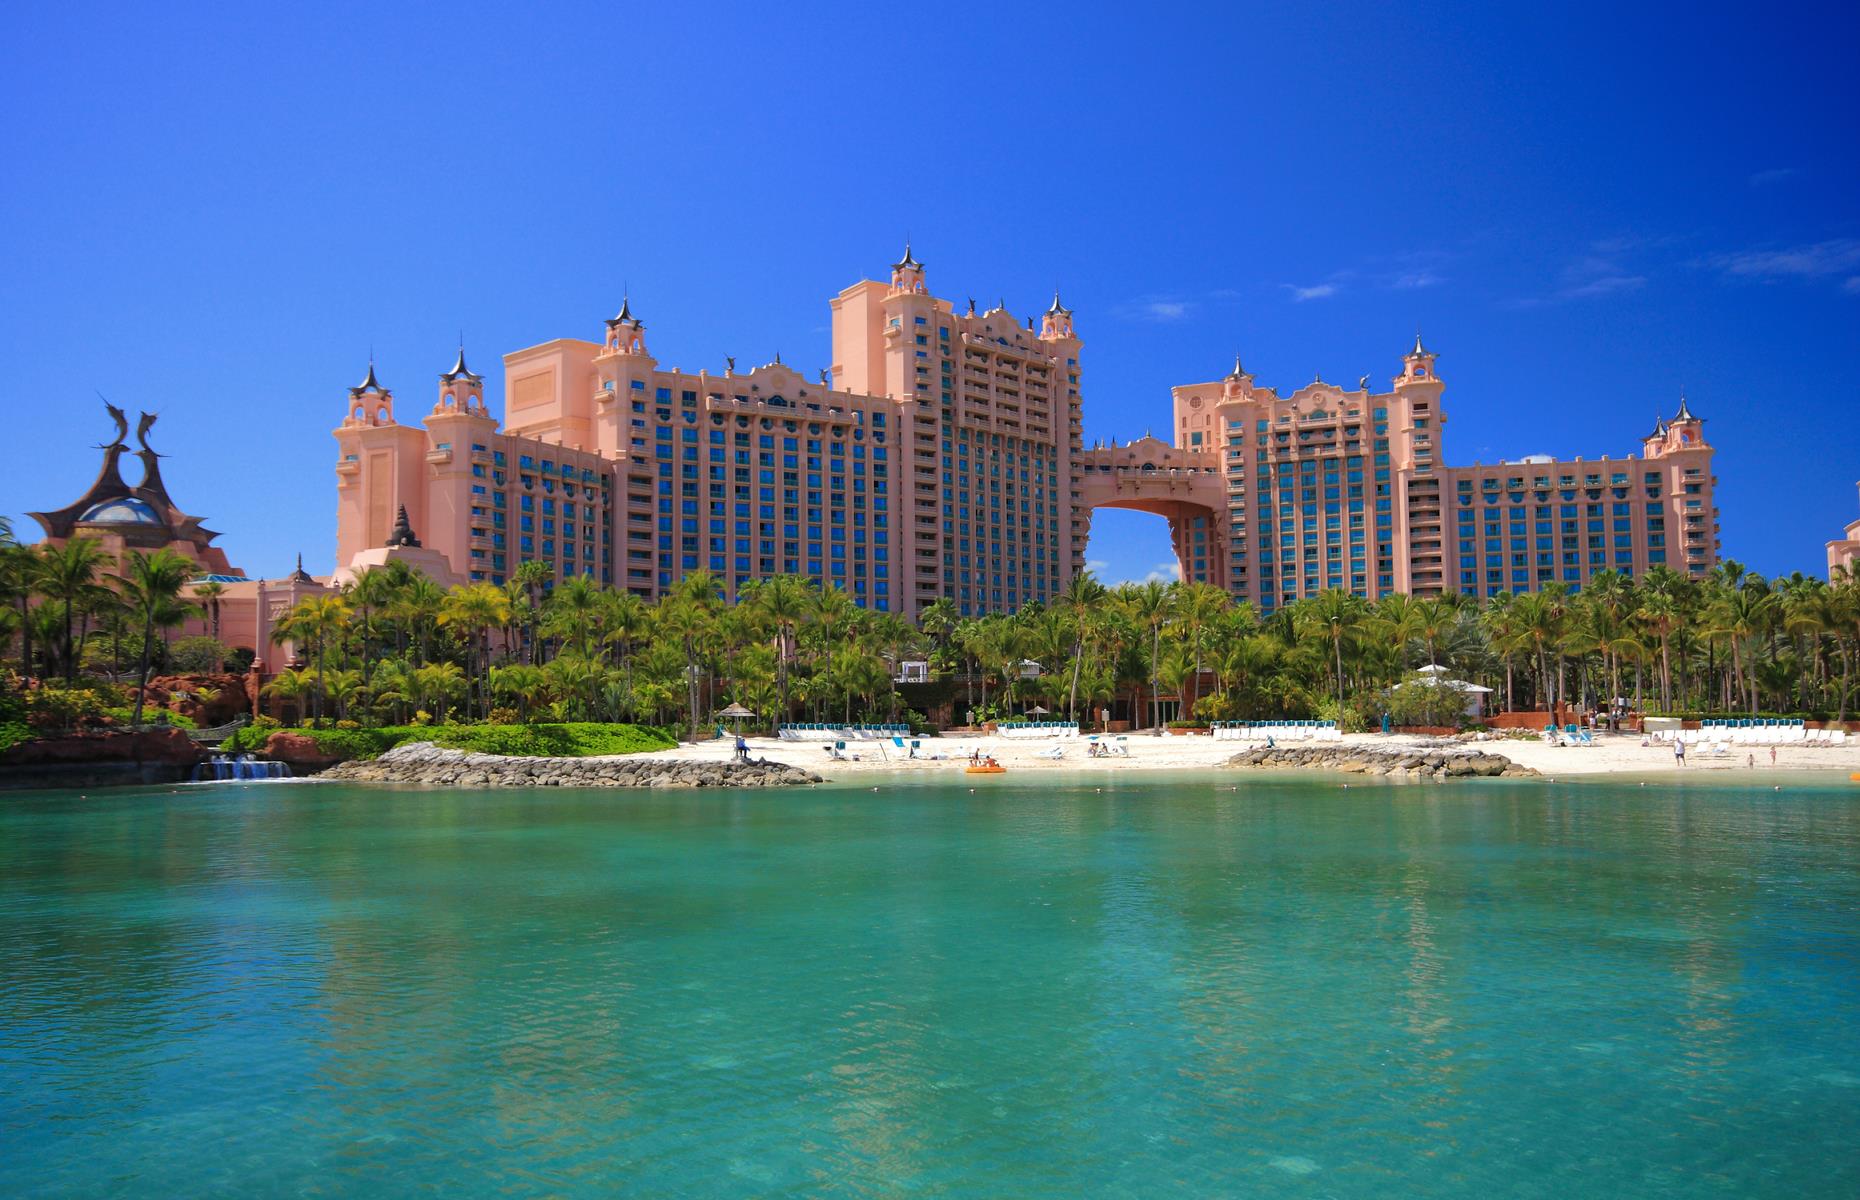 <p>Inspired by the legend of the lost city of Atlantis, this larger-than-life hotel on Paradise Island opened in 1998. A $1 billion expansion followed in 2007, adding to Atlantis’ room count which now totals 3,414. The largest in the Caribbean, the sprawling tropical resort has more than 40 bars and restaurants, a marina and Aquaventure, a 41-acre water park complex that is the largest in the region, along with a casino and theater.</p>